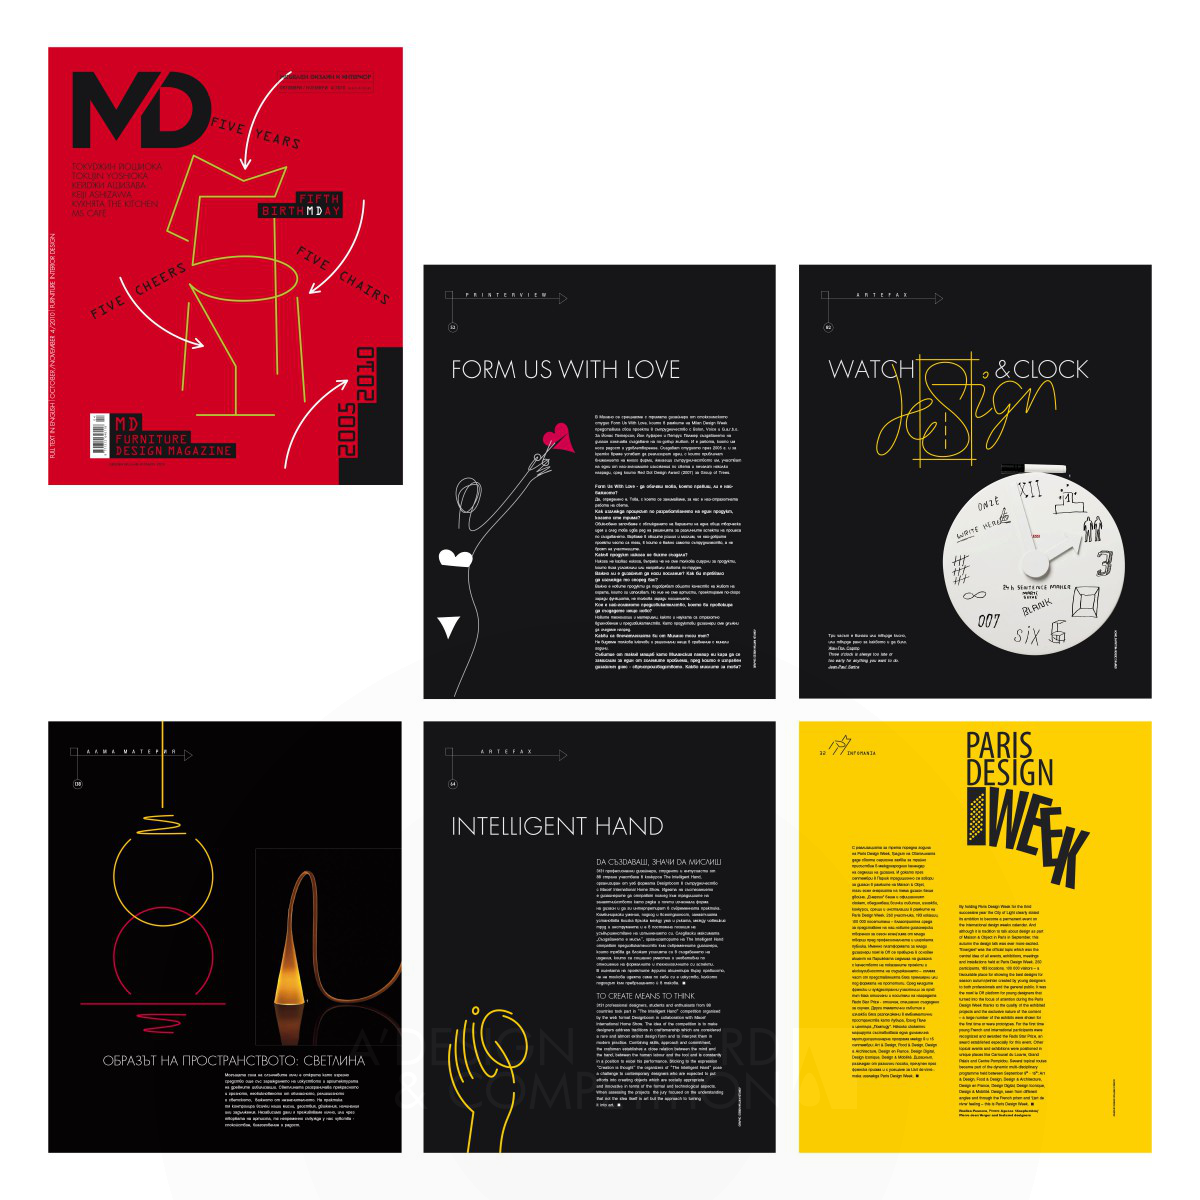 MD design magazine Graphic layout by Kitanov